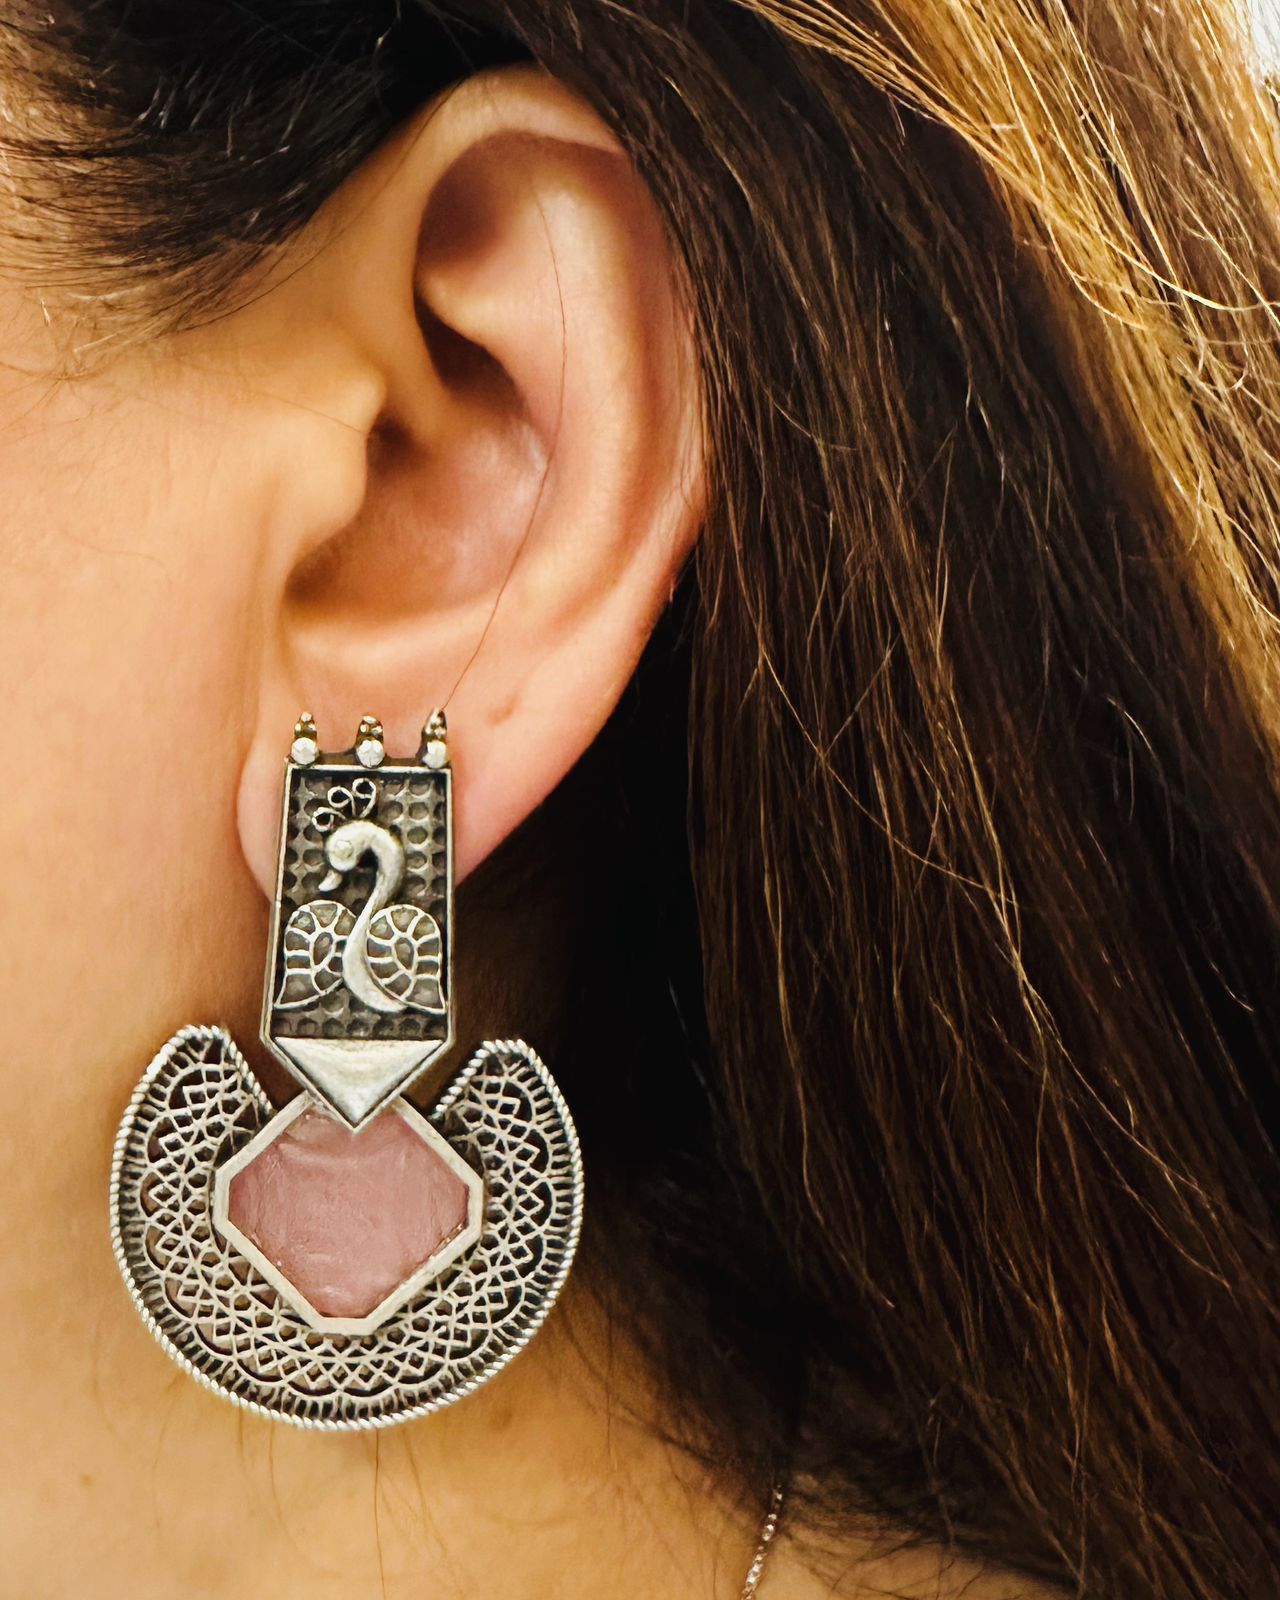 Majestic Plumage: Peacock-Inspired Oxidized Silver Earrings with Onion Pink Crafted Stone